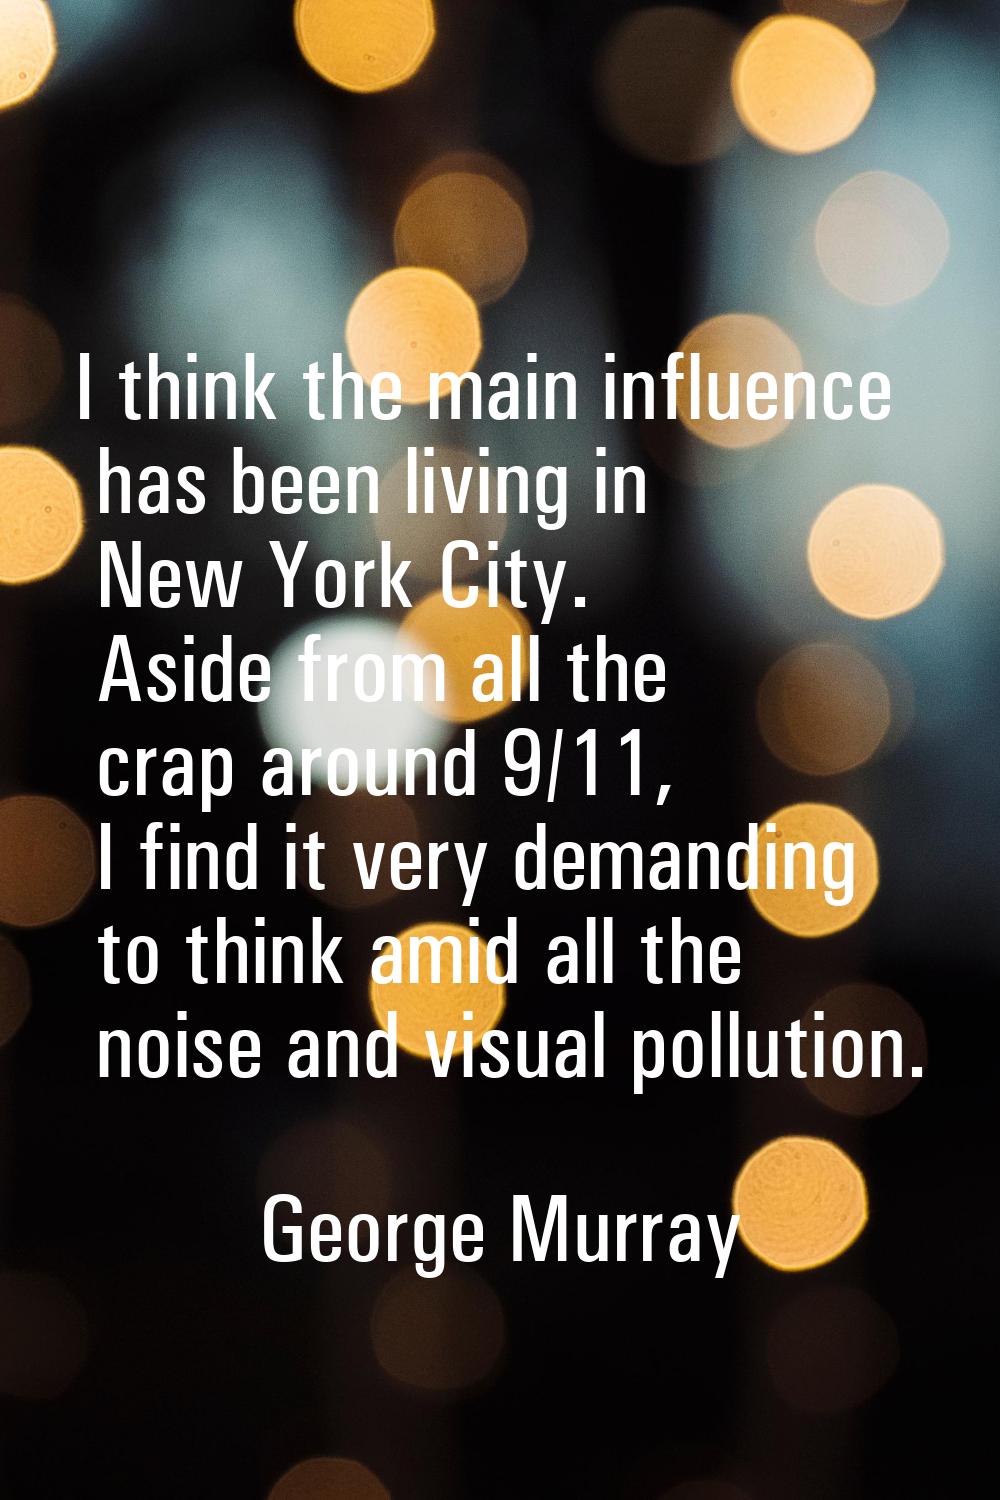 I think the main influence has been living in New York City. Aside from all the crap around 9/11, I